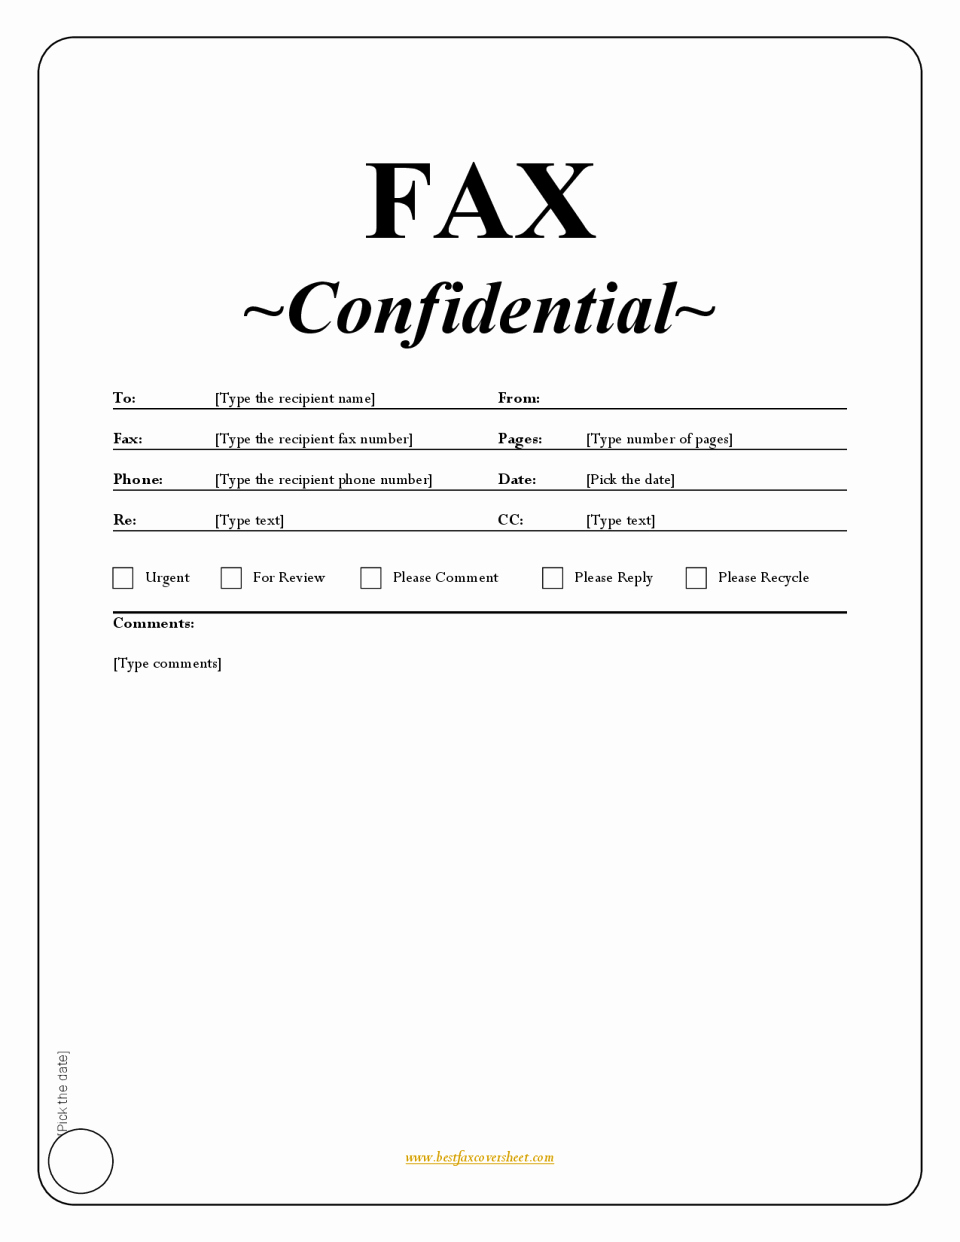 Free Fax Templates for Word Awesome Sample Faxr Sheet Free In Word Document Microsoft